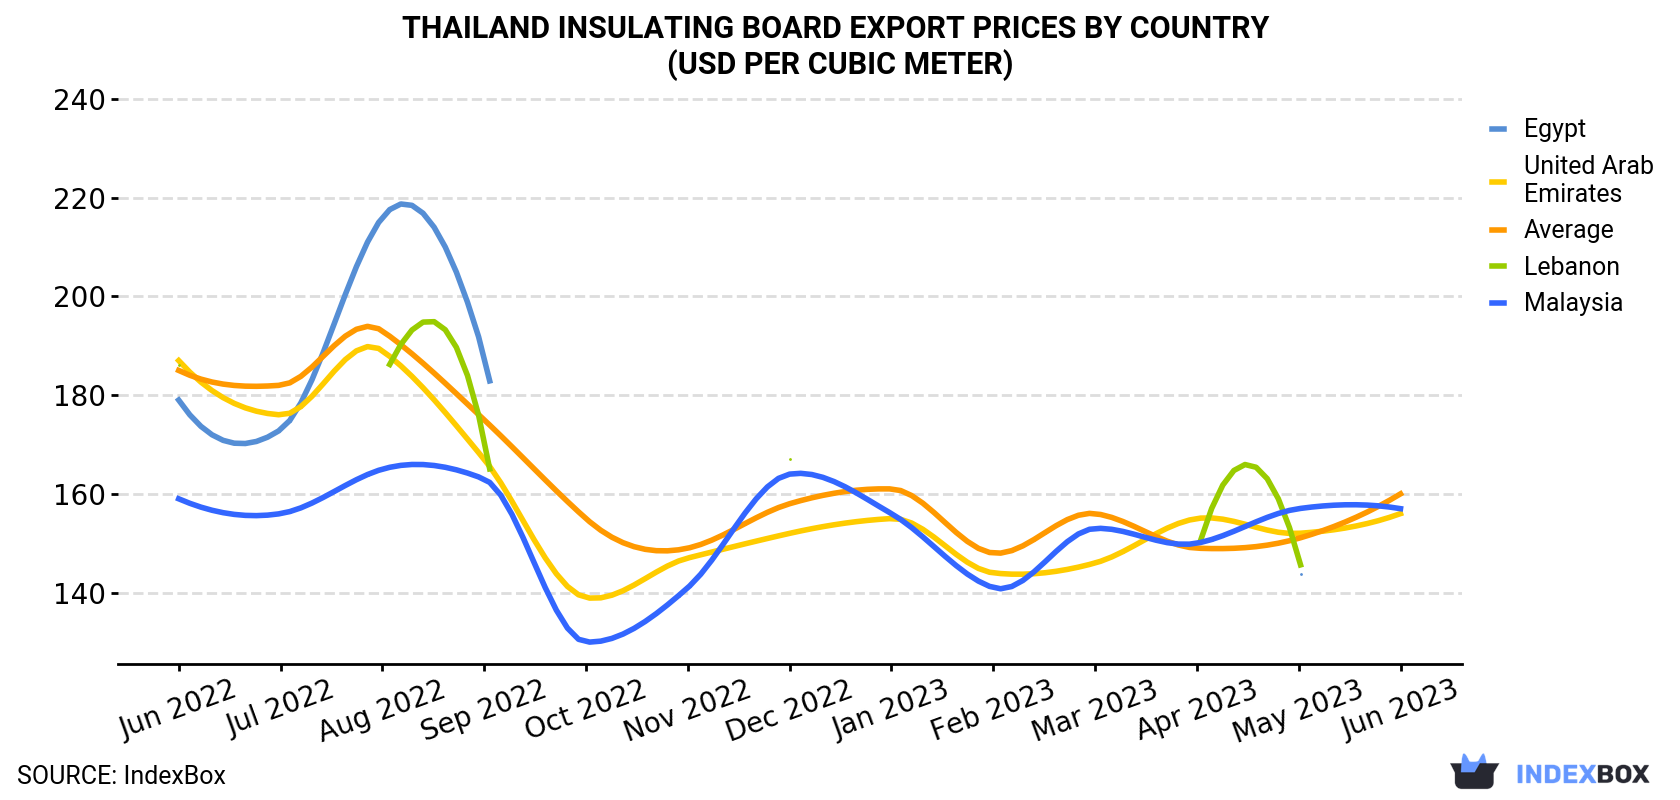 Thailand Insulating Board Export Prices By Country (USD Per Cubic Meter)